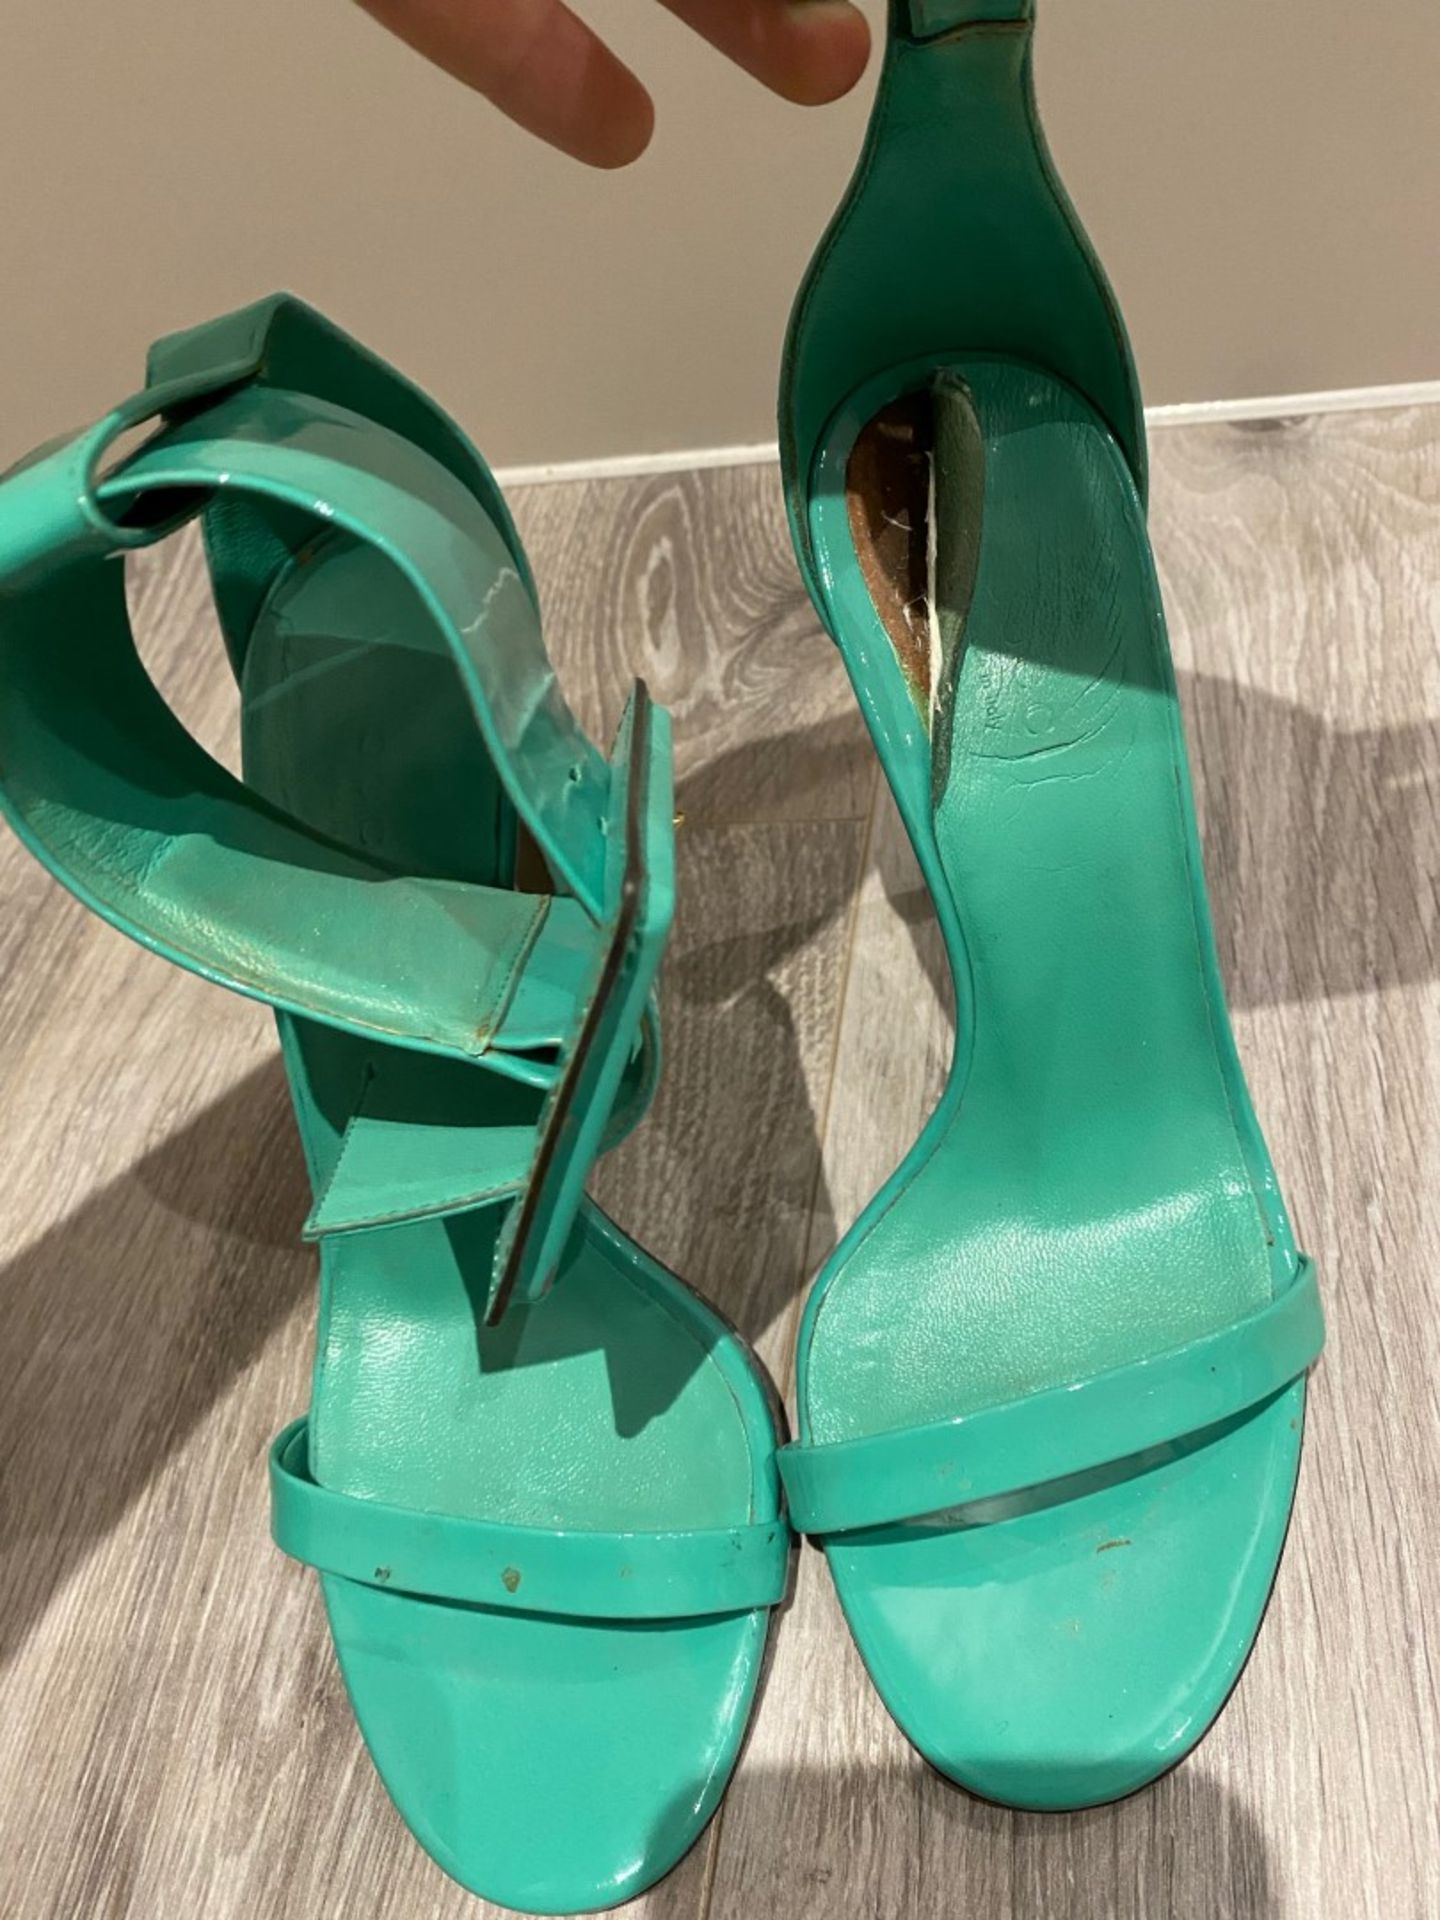 1 x Pair Of Genuine Gucci High Heel Shoes In Green - Size: 36 - Preowned in Worn Condition - Ref: LO - Image 3 of 4